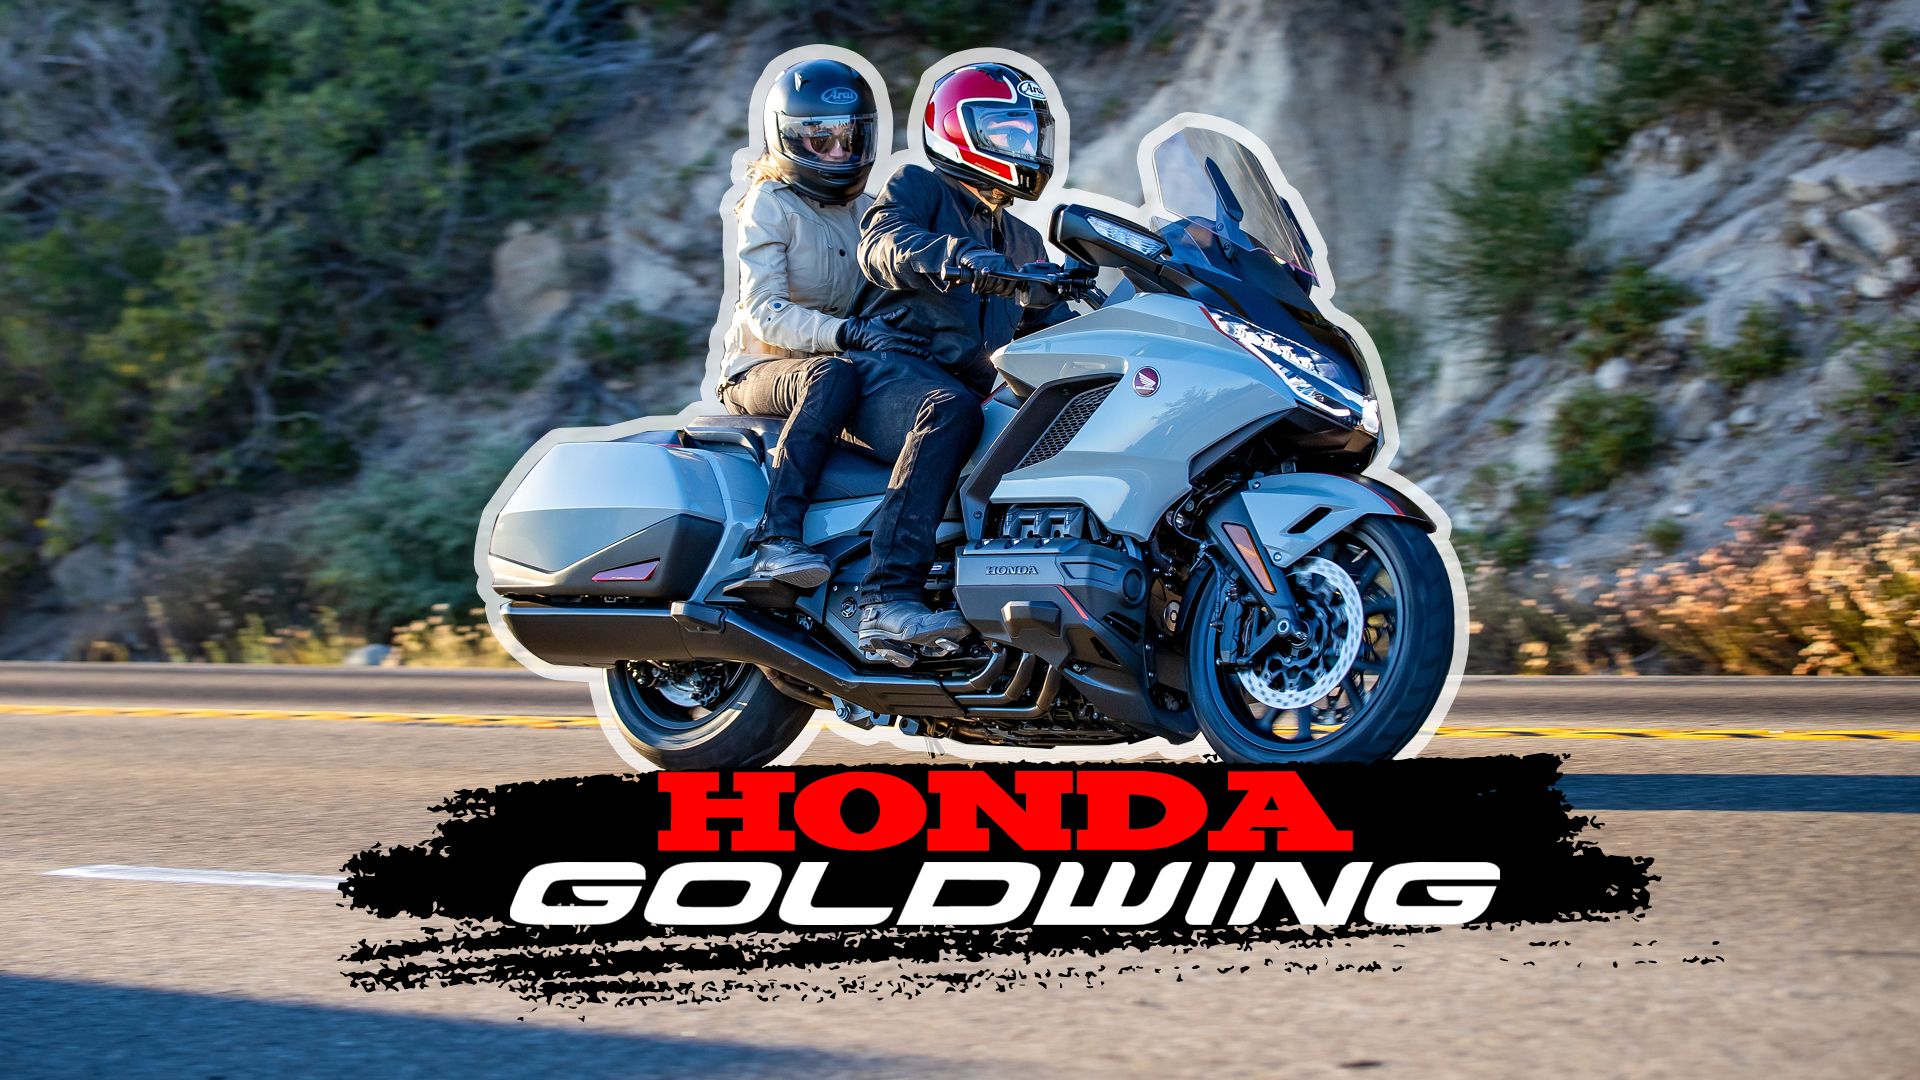 2022 Honda Gold Wing - Performance, Price, and Photos